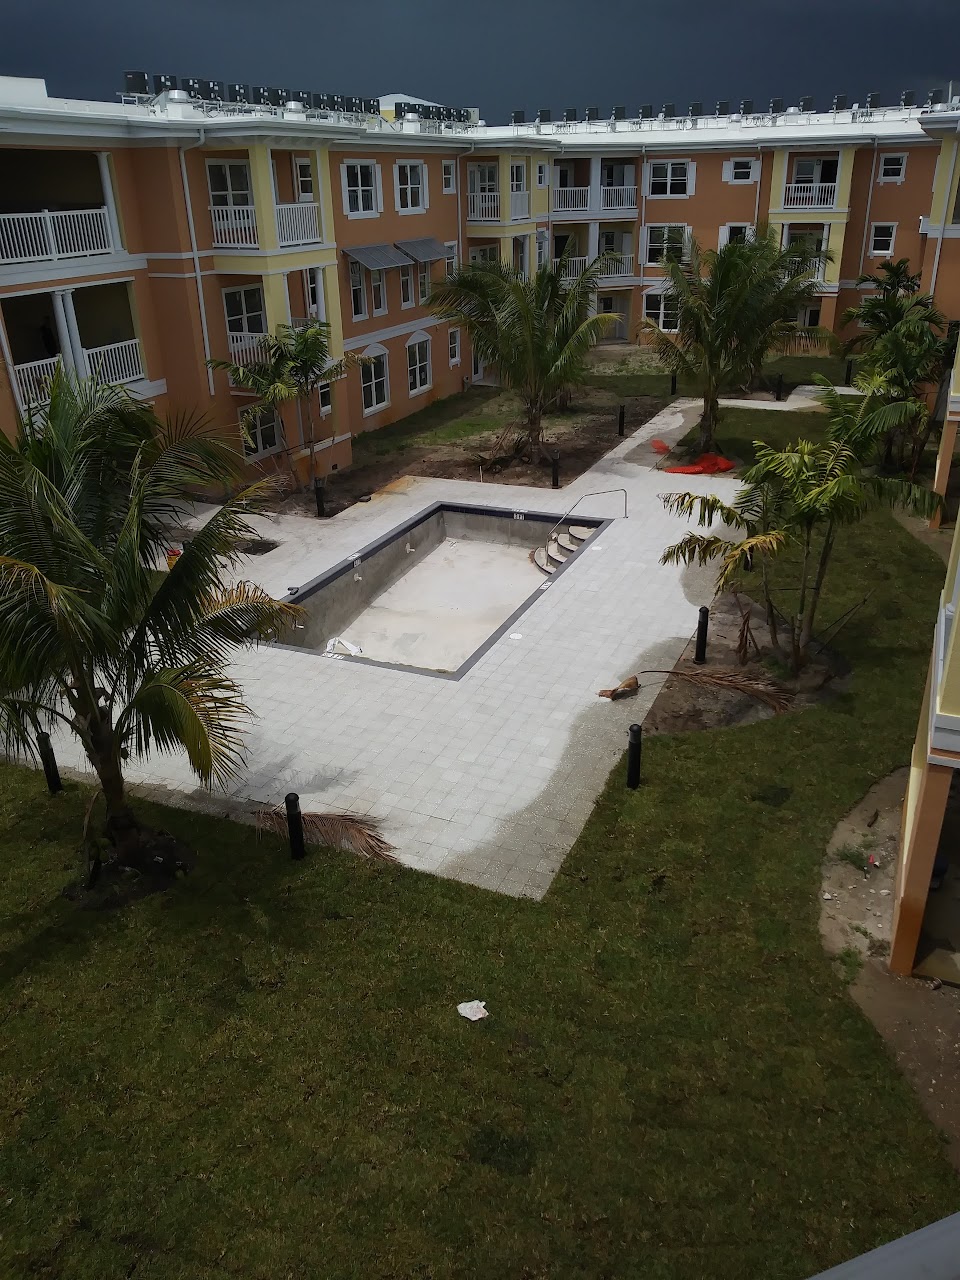 Photo of COURTS AT VILLAGE SQUARE. Affordable housing located at 738 SW 12TH AVENUE DELRAY BEACH, FL 33444